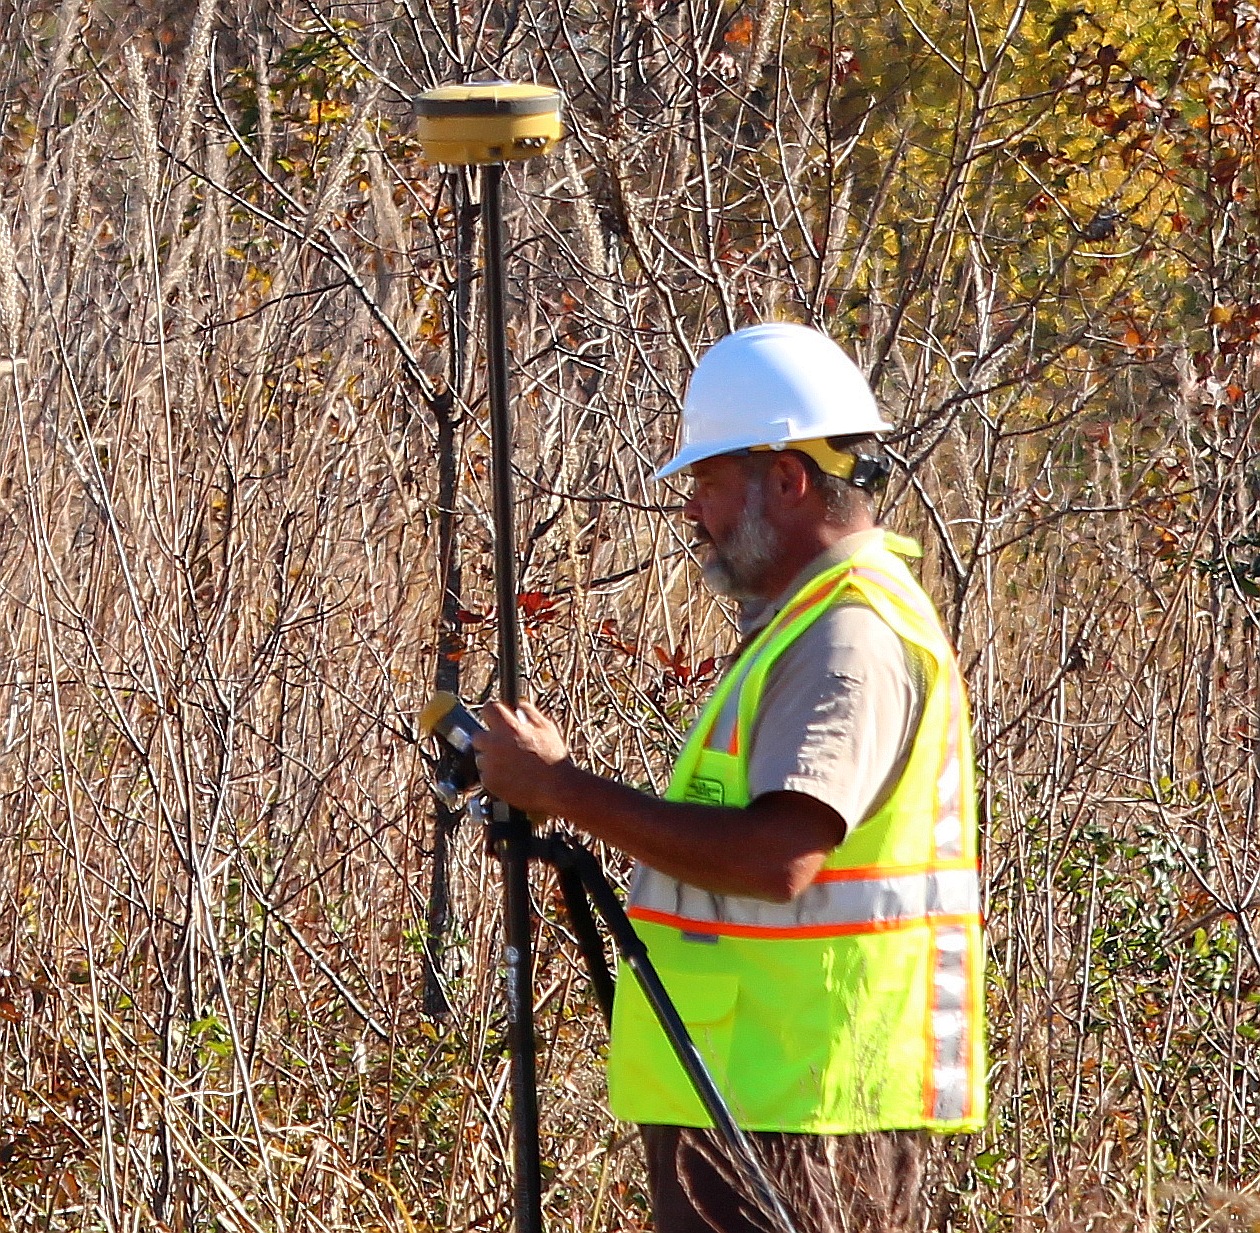 A wearing a bright yellow safety vest and a white safety helmet holds a surveying tool in brush